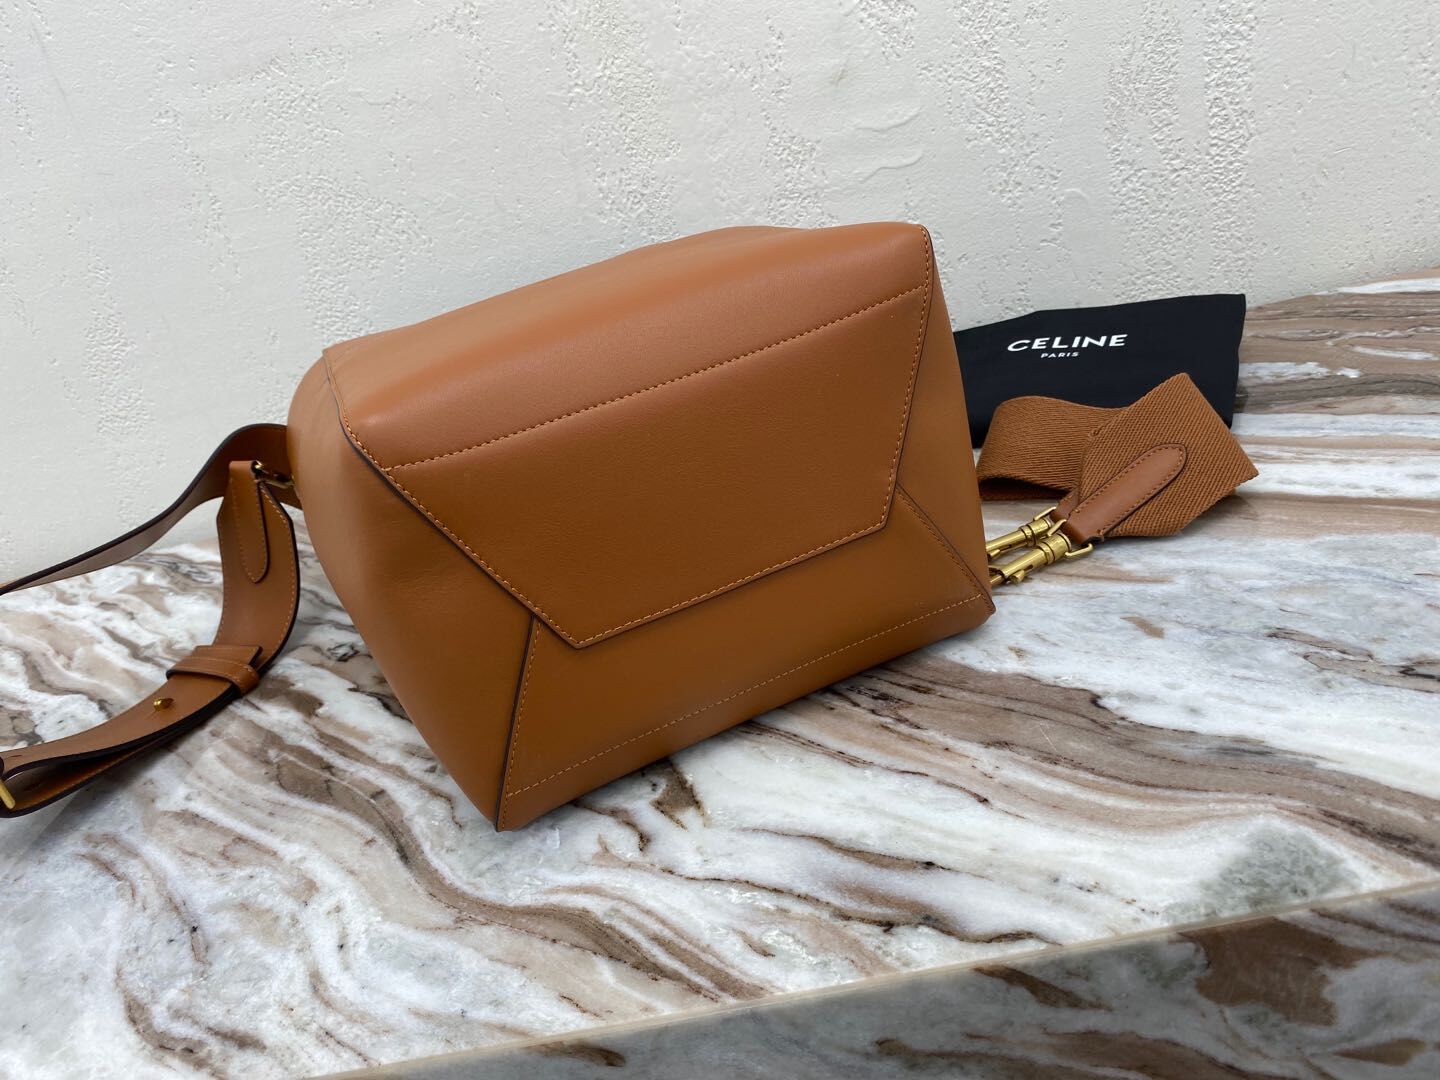 CELINE Sangle Seau Bag in Smooth Leather C3371-2 Brown